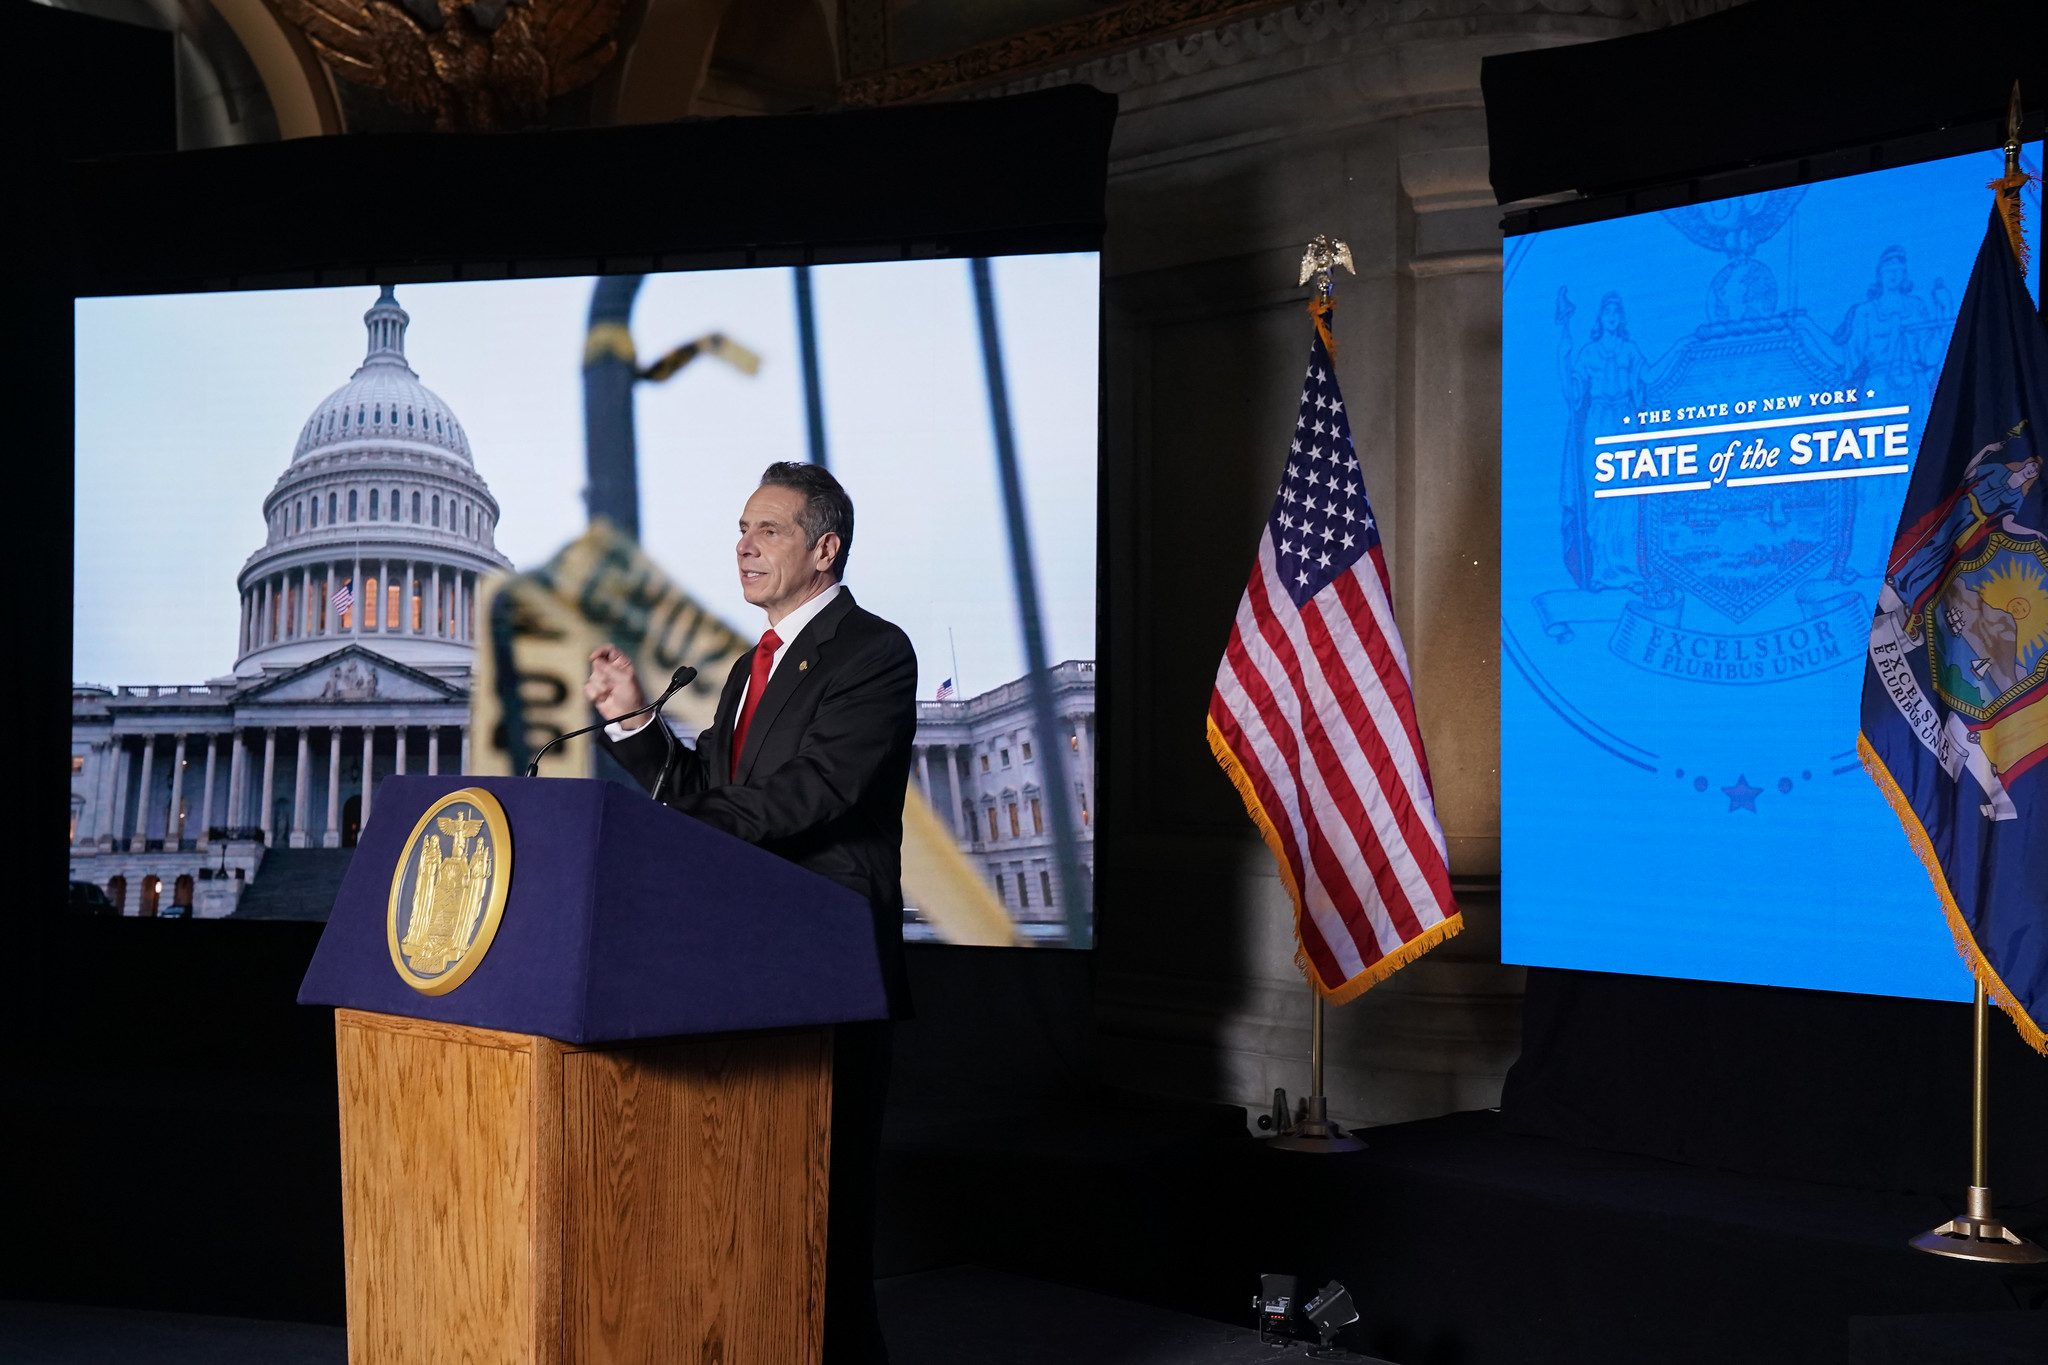 Gov. Andrew Cuomo delivers his 2021 State of the State address. (Photo by Don Pollard/Office of Gov. Andrew M. Cuomo)